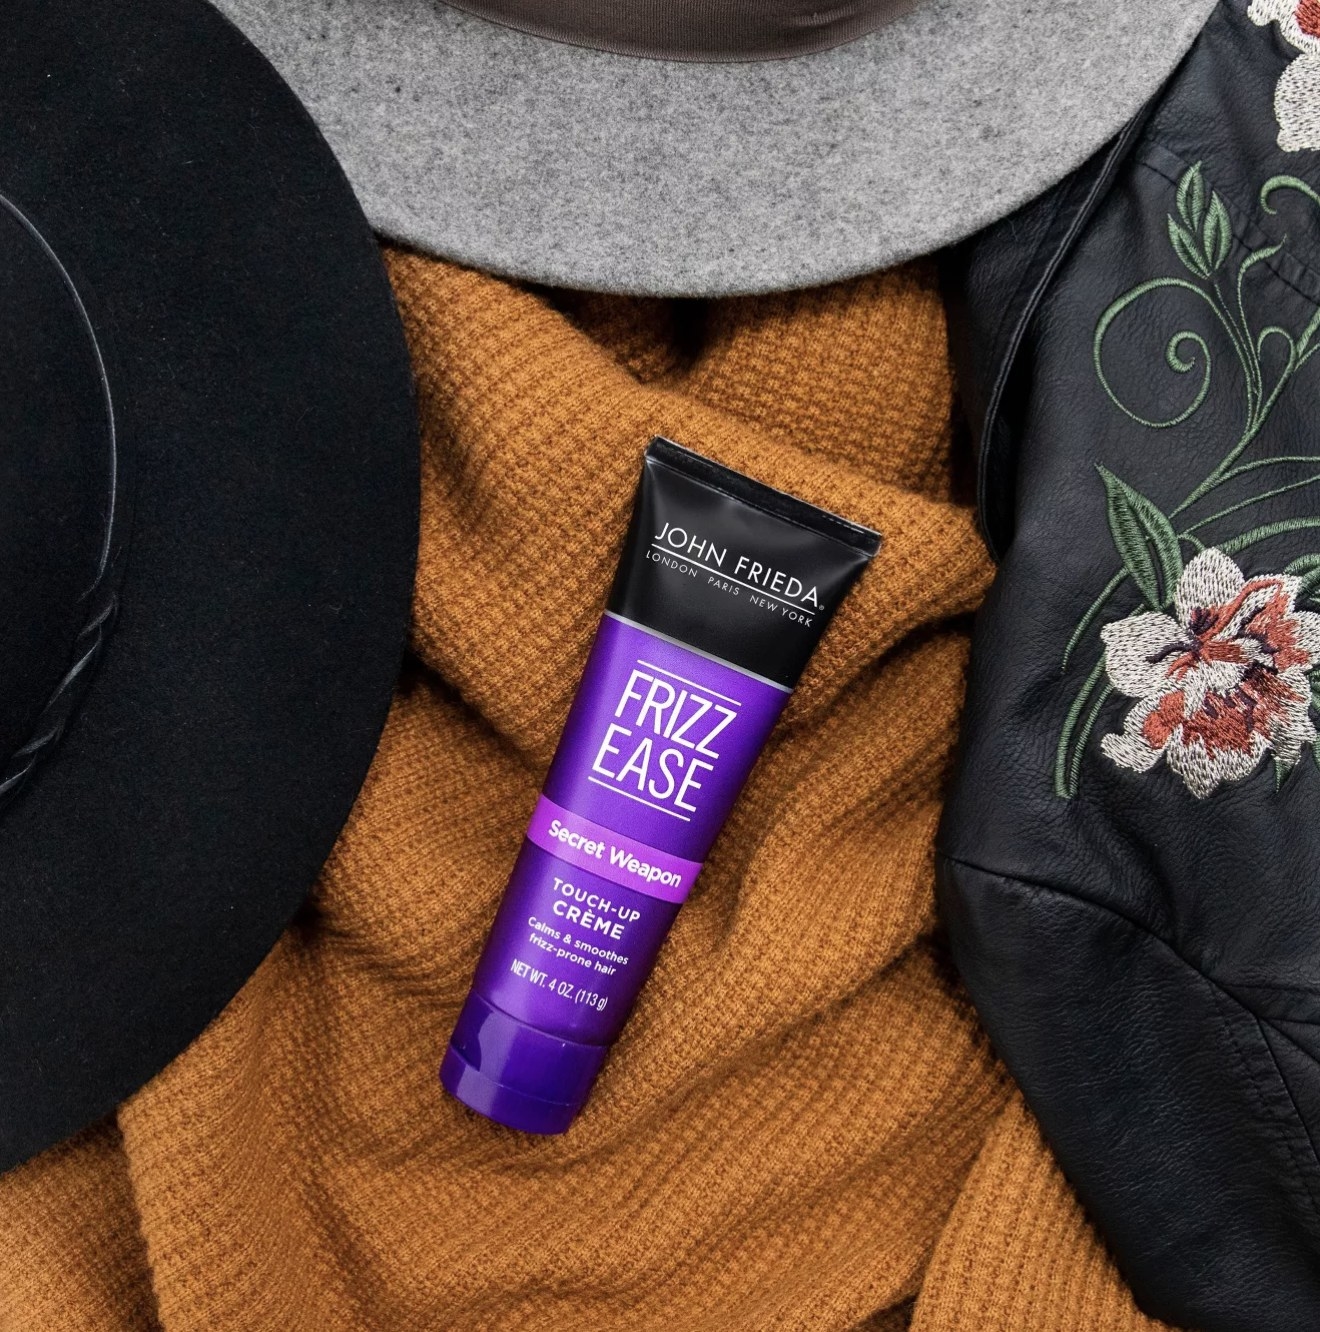 A tube of hair creme on top of an orange sweater with a black jacket and two hats